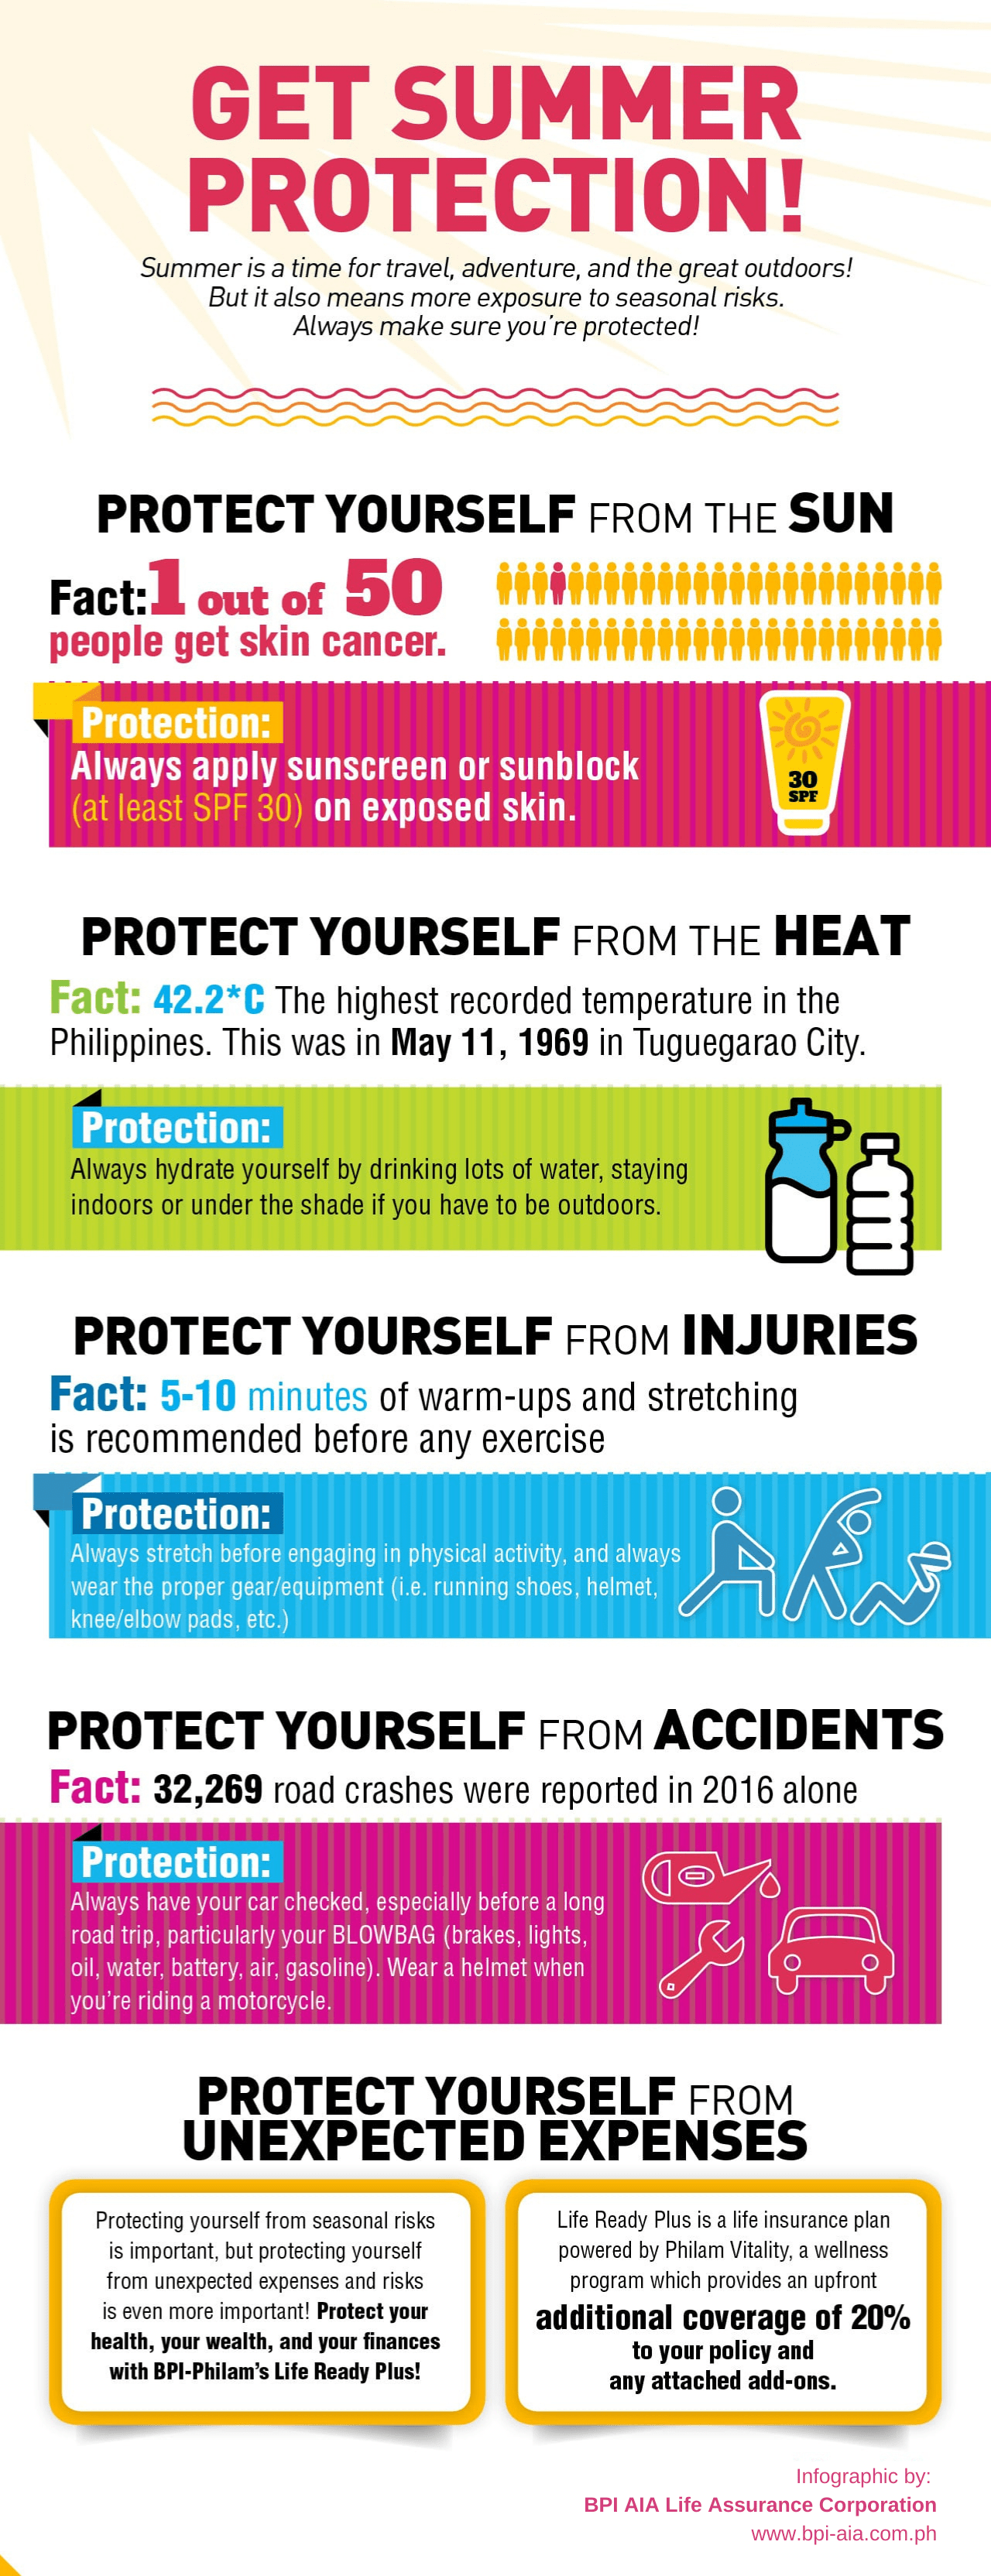 [Infographic] Get Summer Protection!